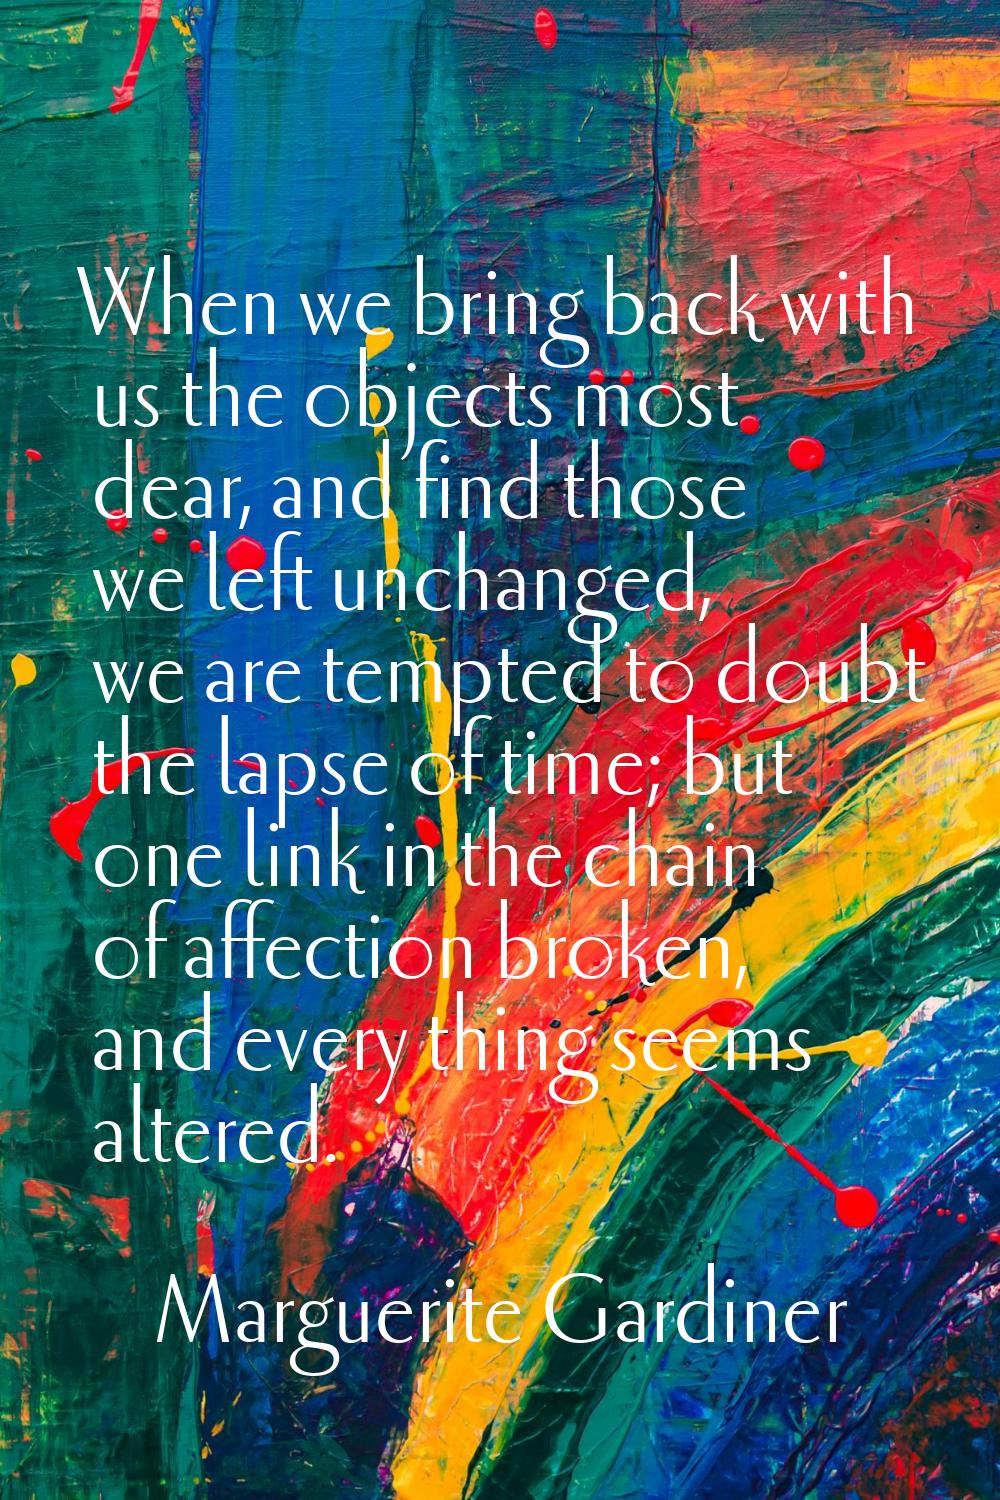 When we bring back with us the objects most dear, and find those we left unchanged, we are tempted 